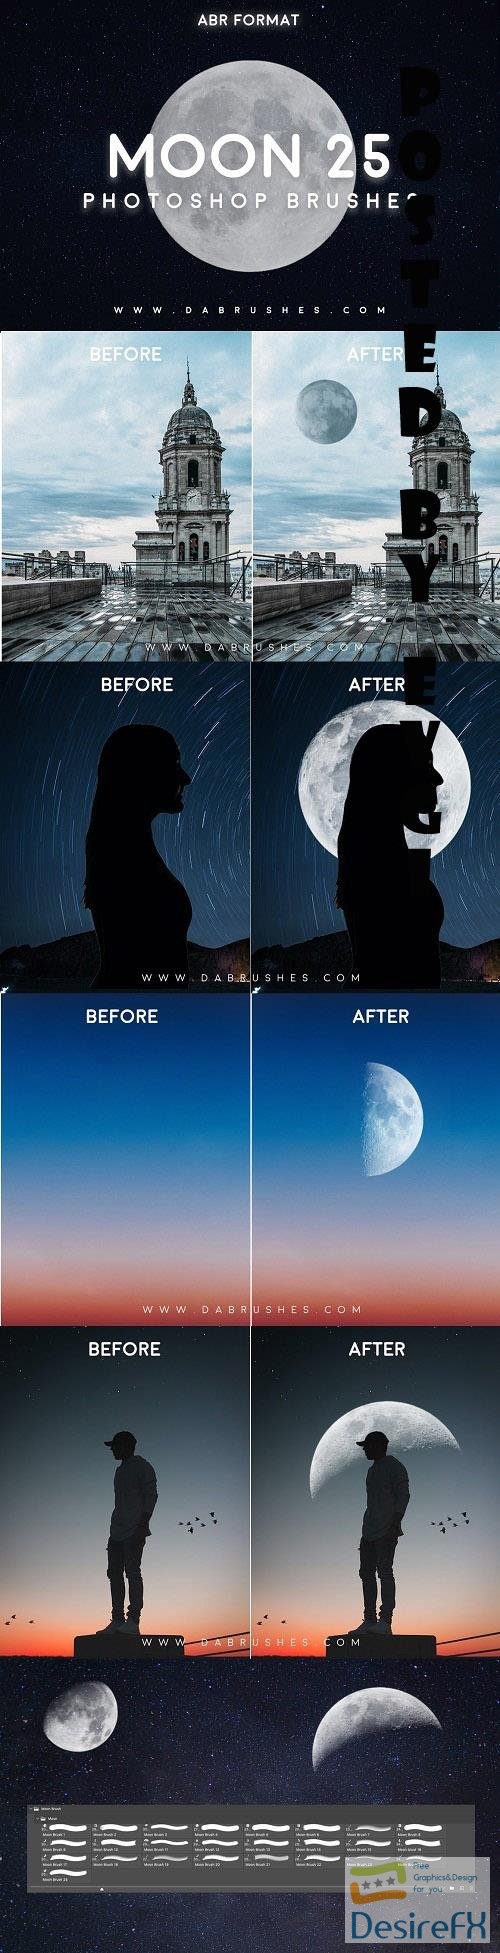 25 Moon Brushes For Photoshop - 6036825